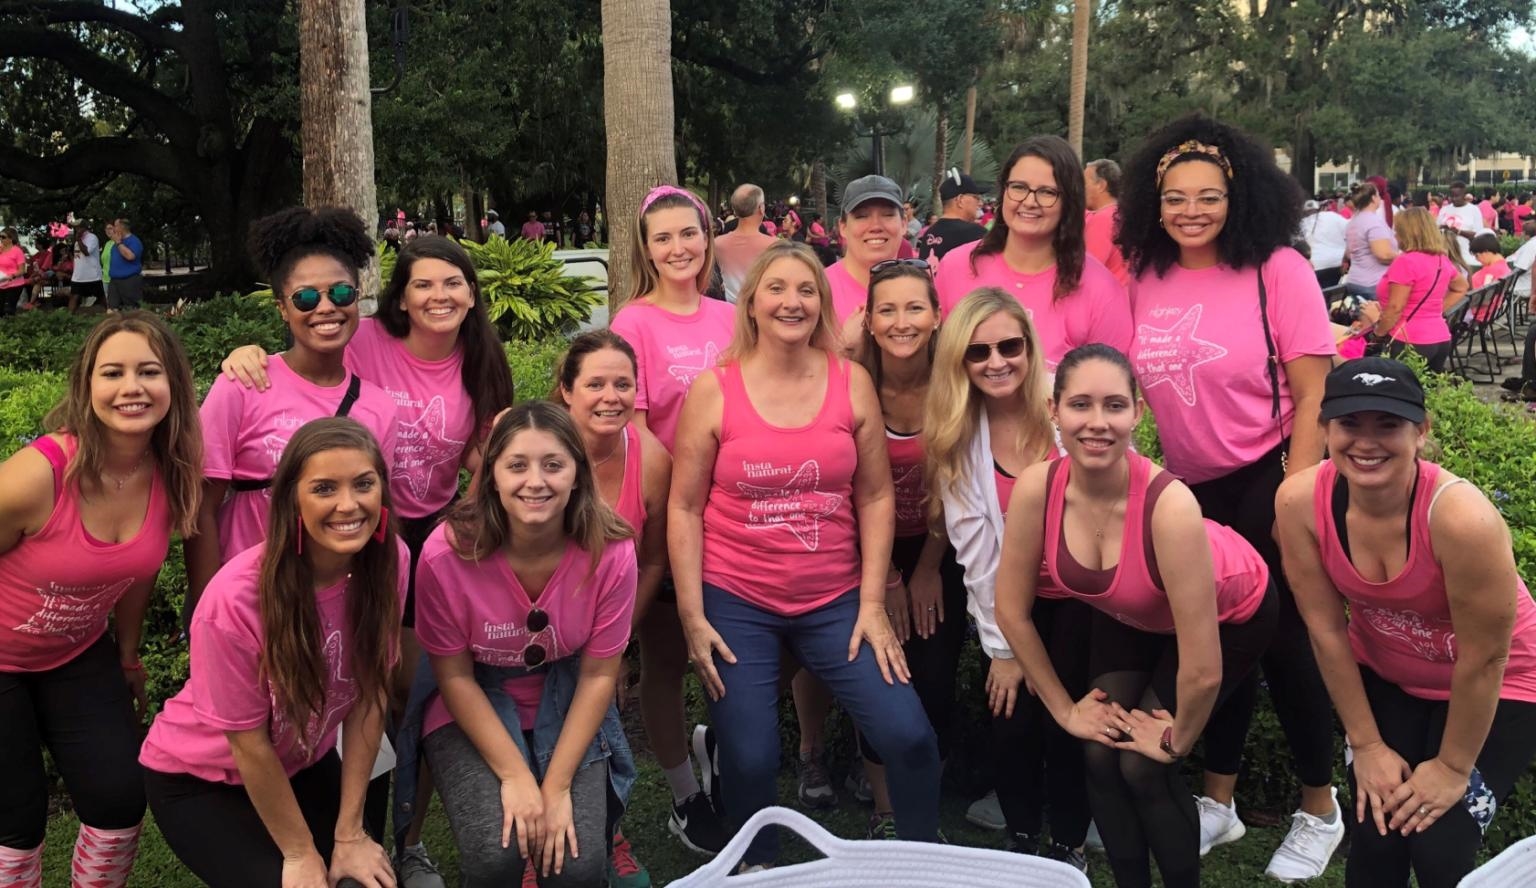 Instanatura at Making Strides Against Breast Cancer of Orlando 2019